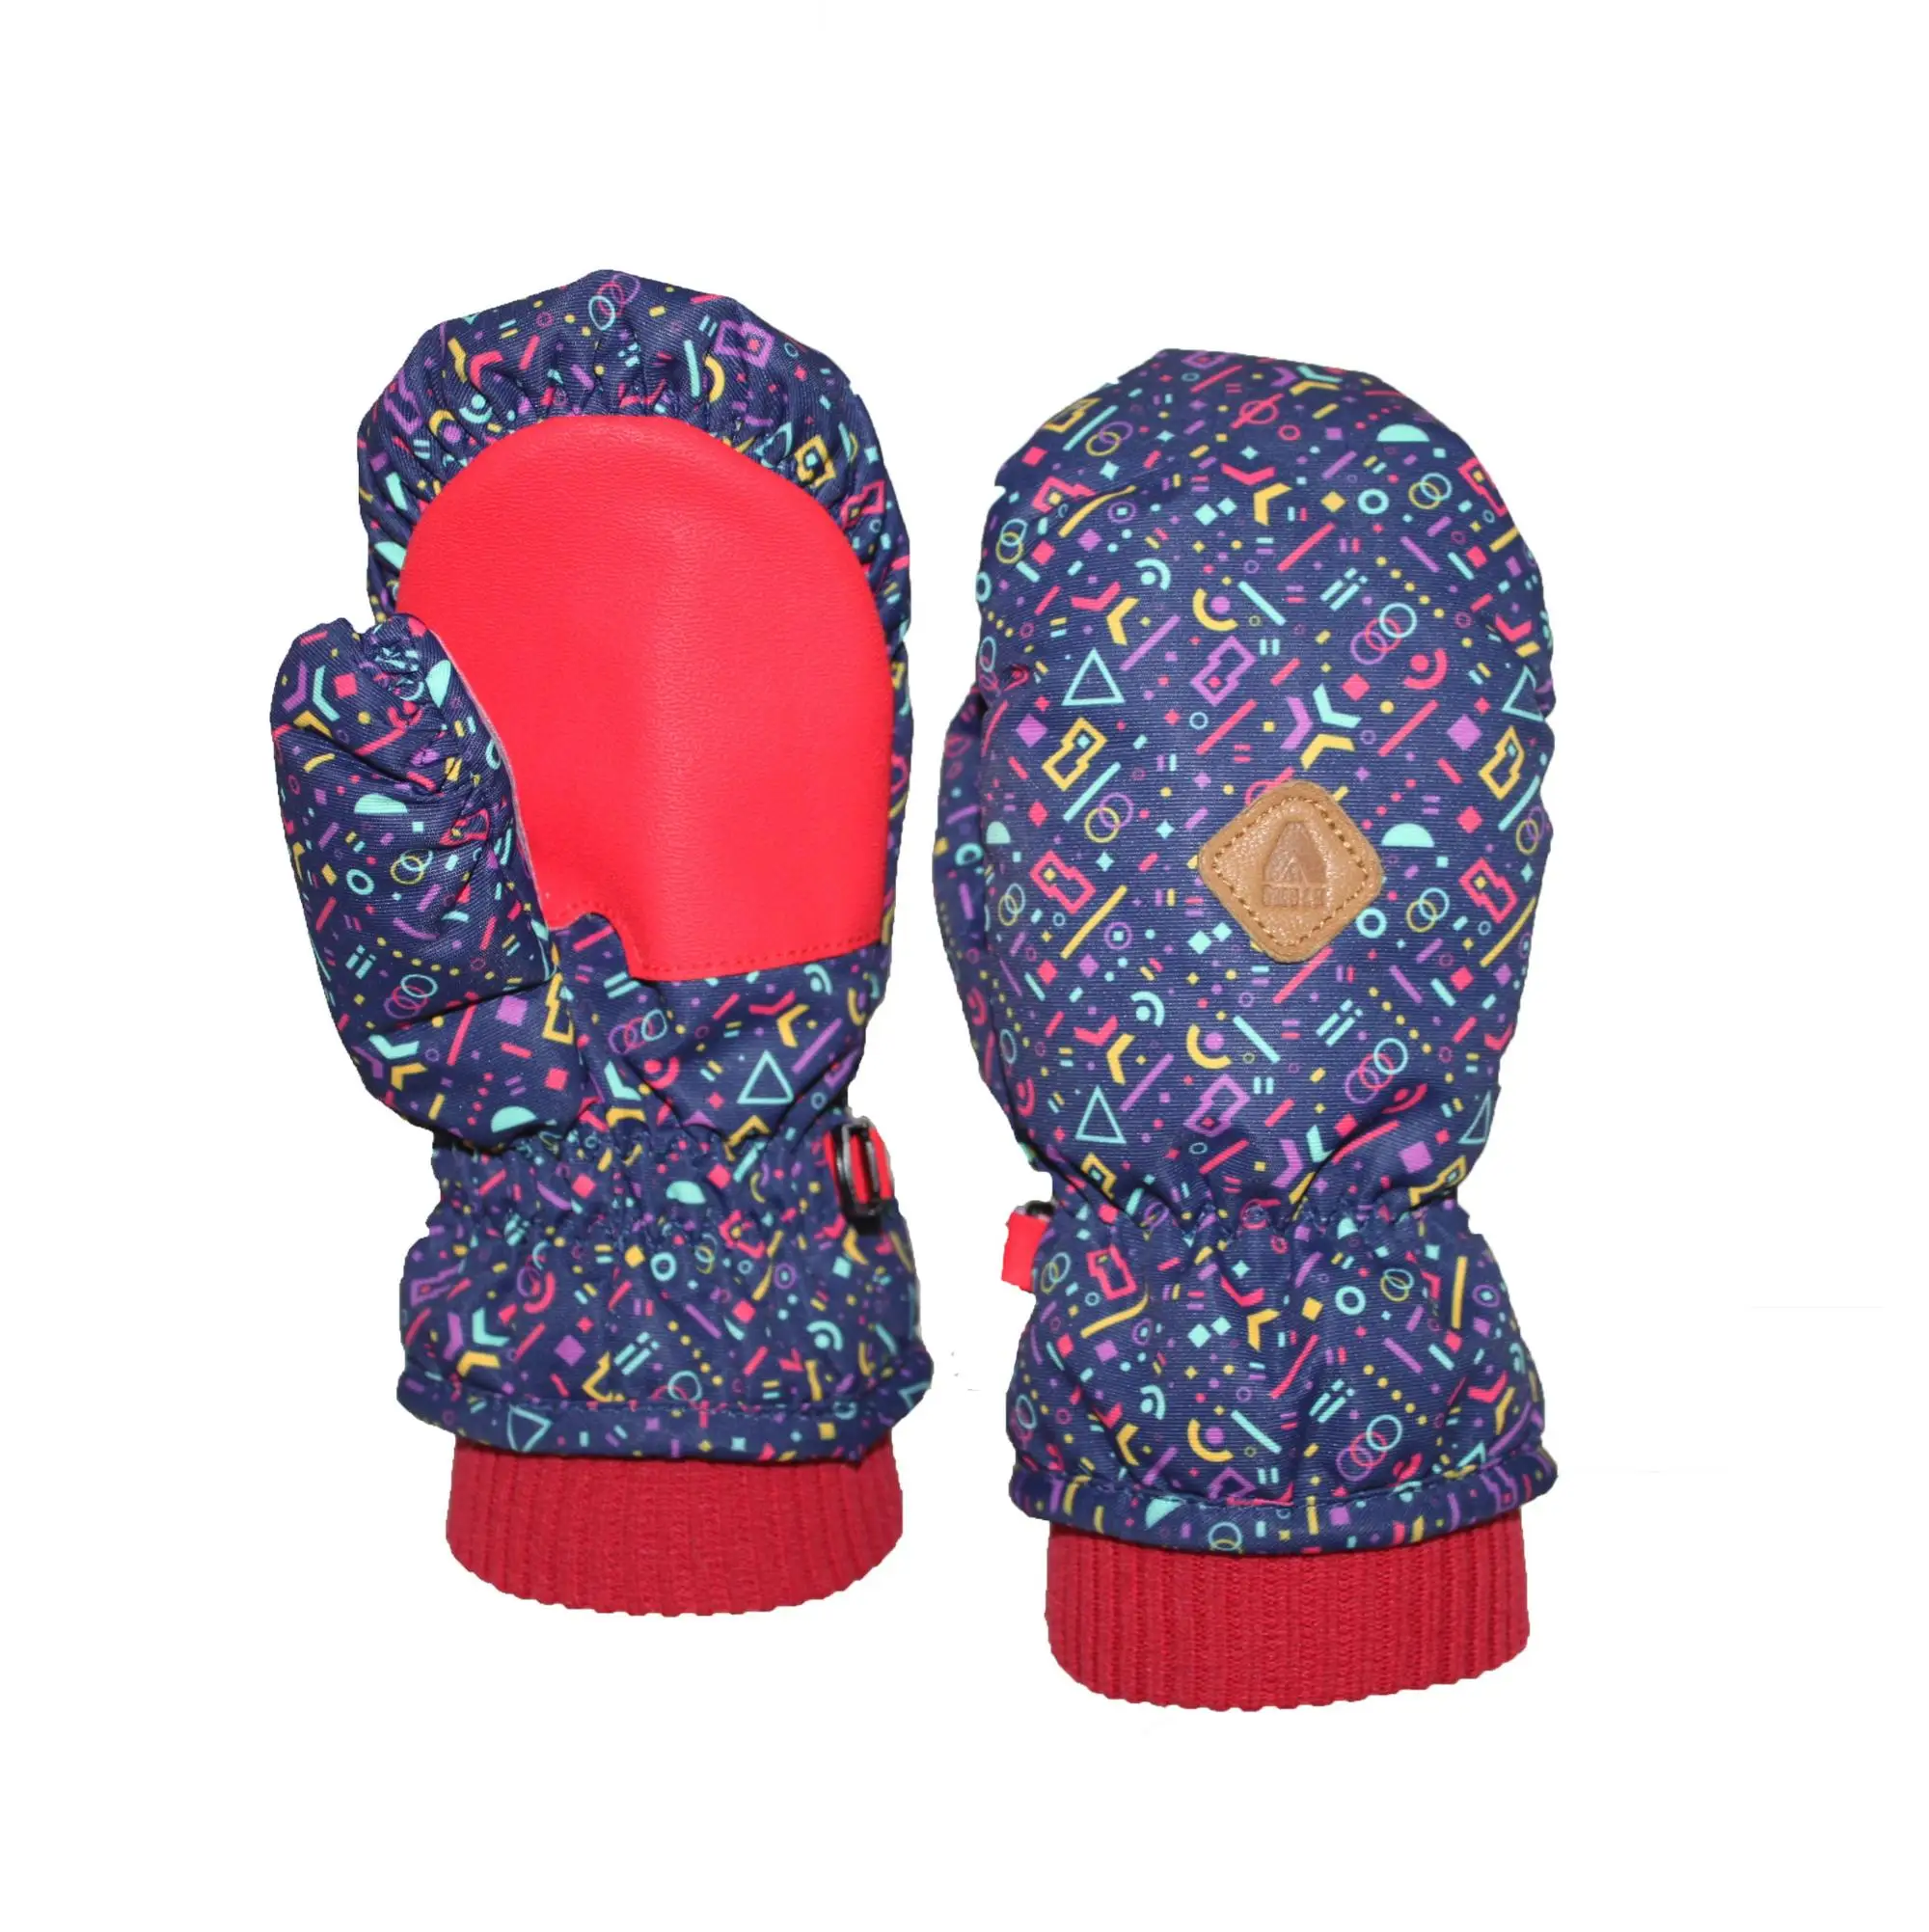 mittens for infants for winter